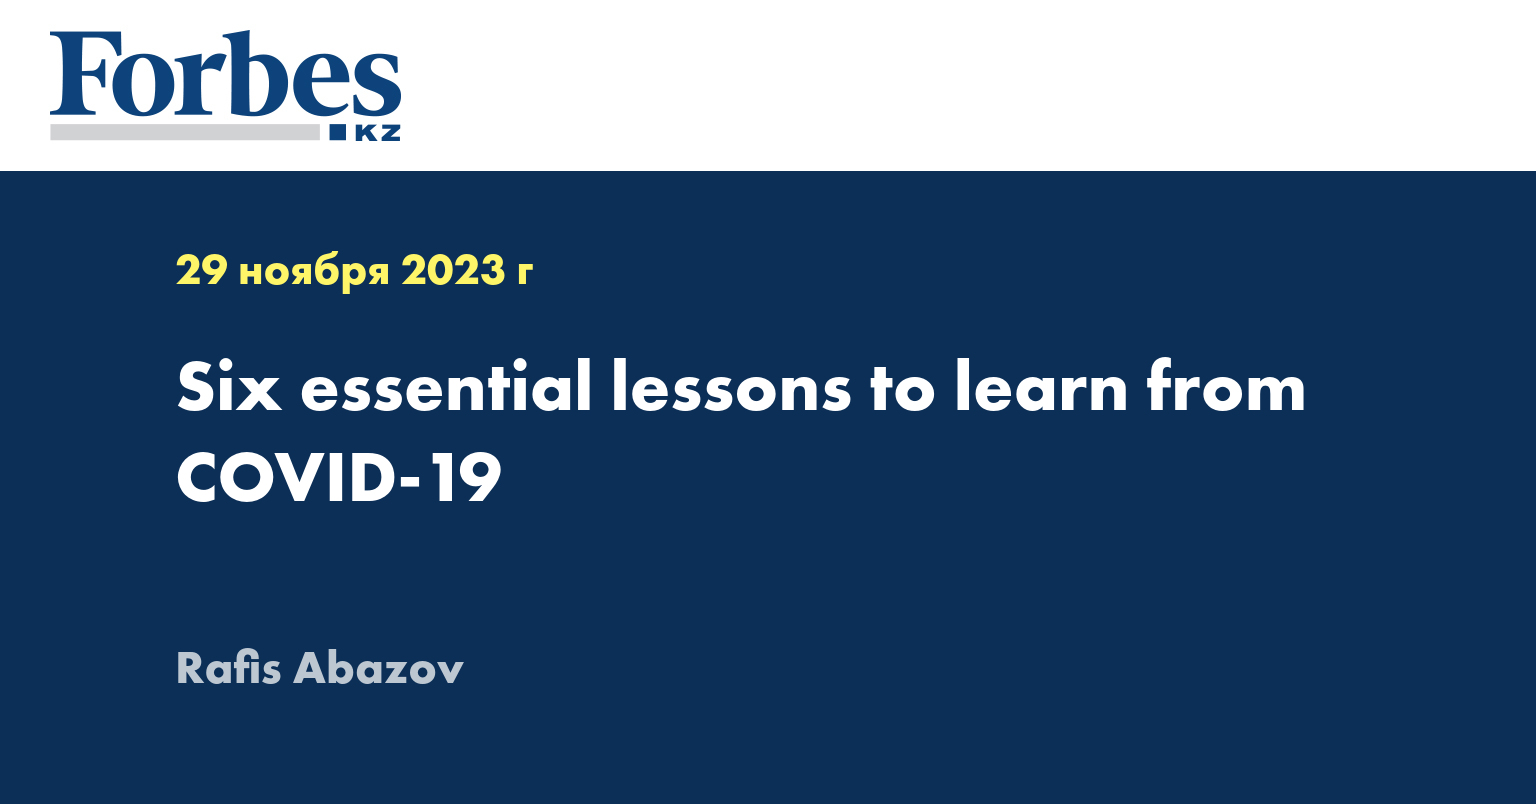 Six essential lessons to learn from COVID-19